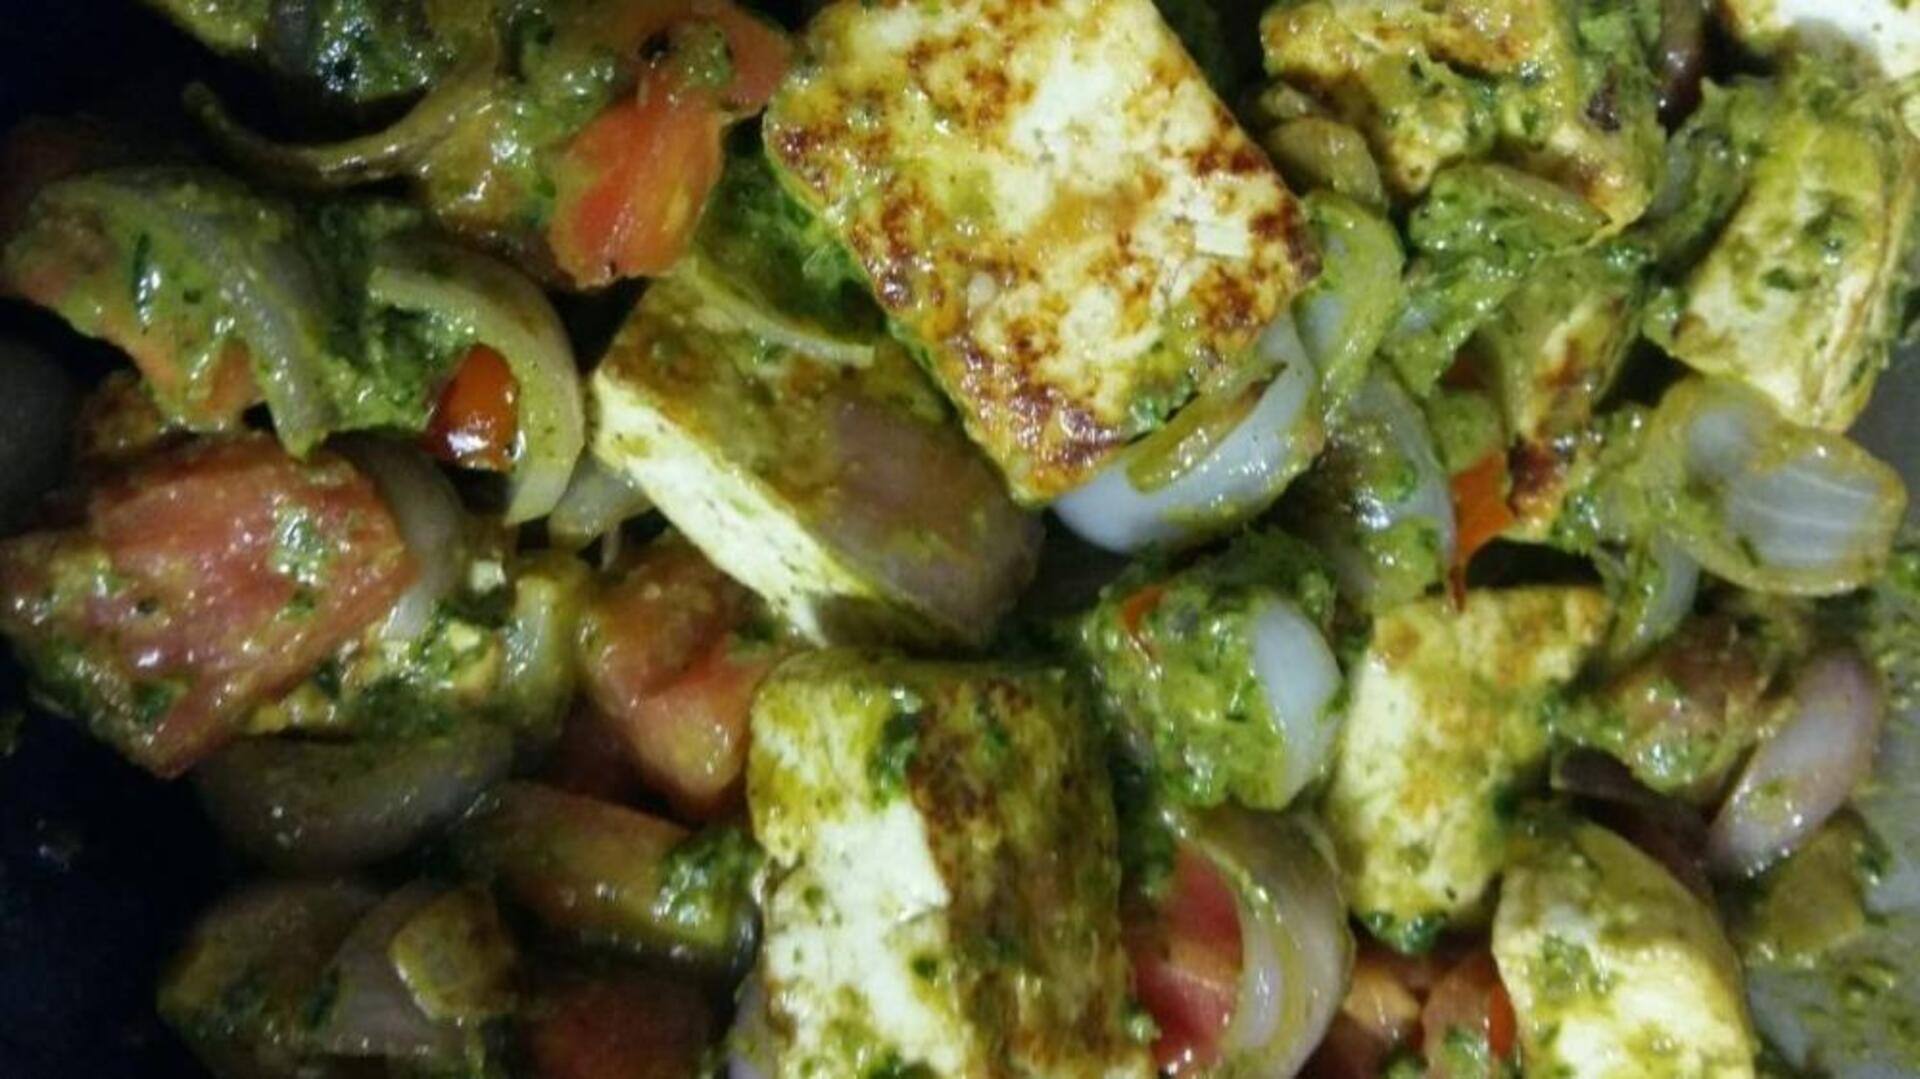 Your guests will love this fusion Indo-Italian pesto paneer dish